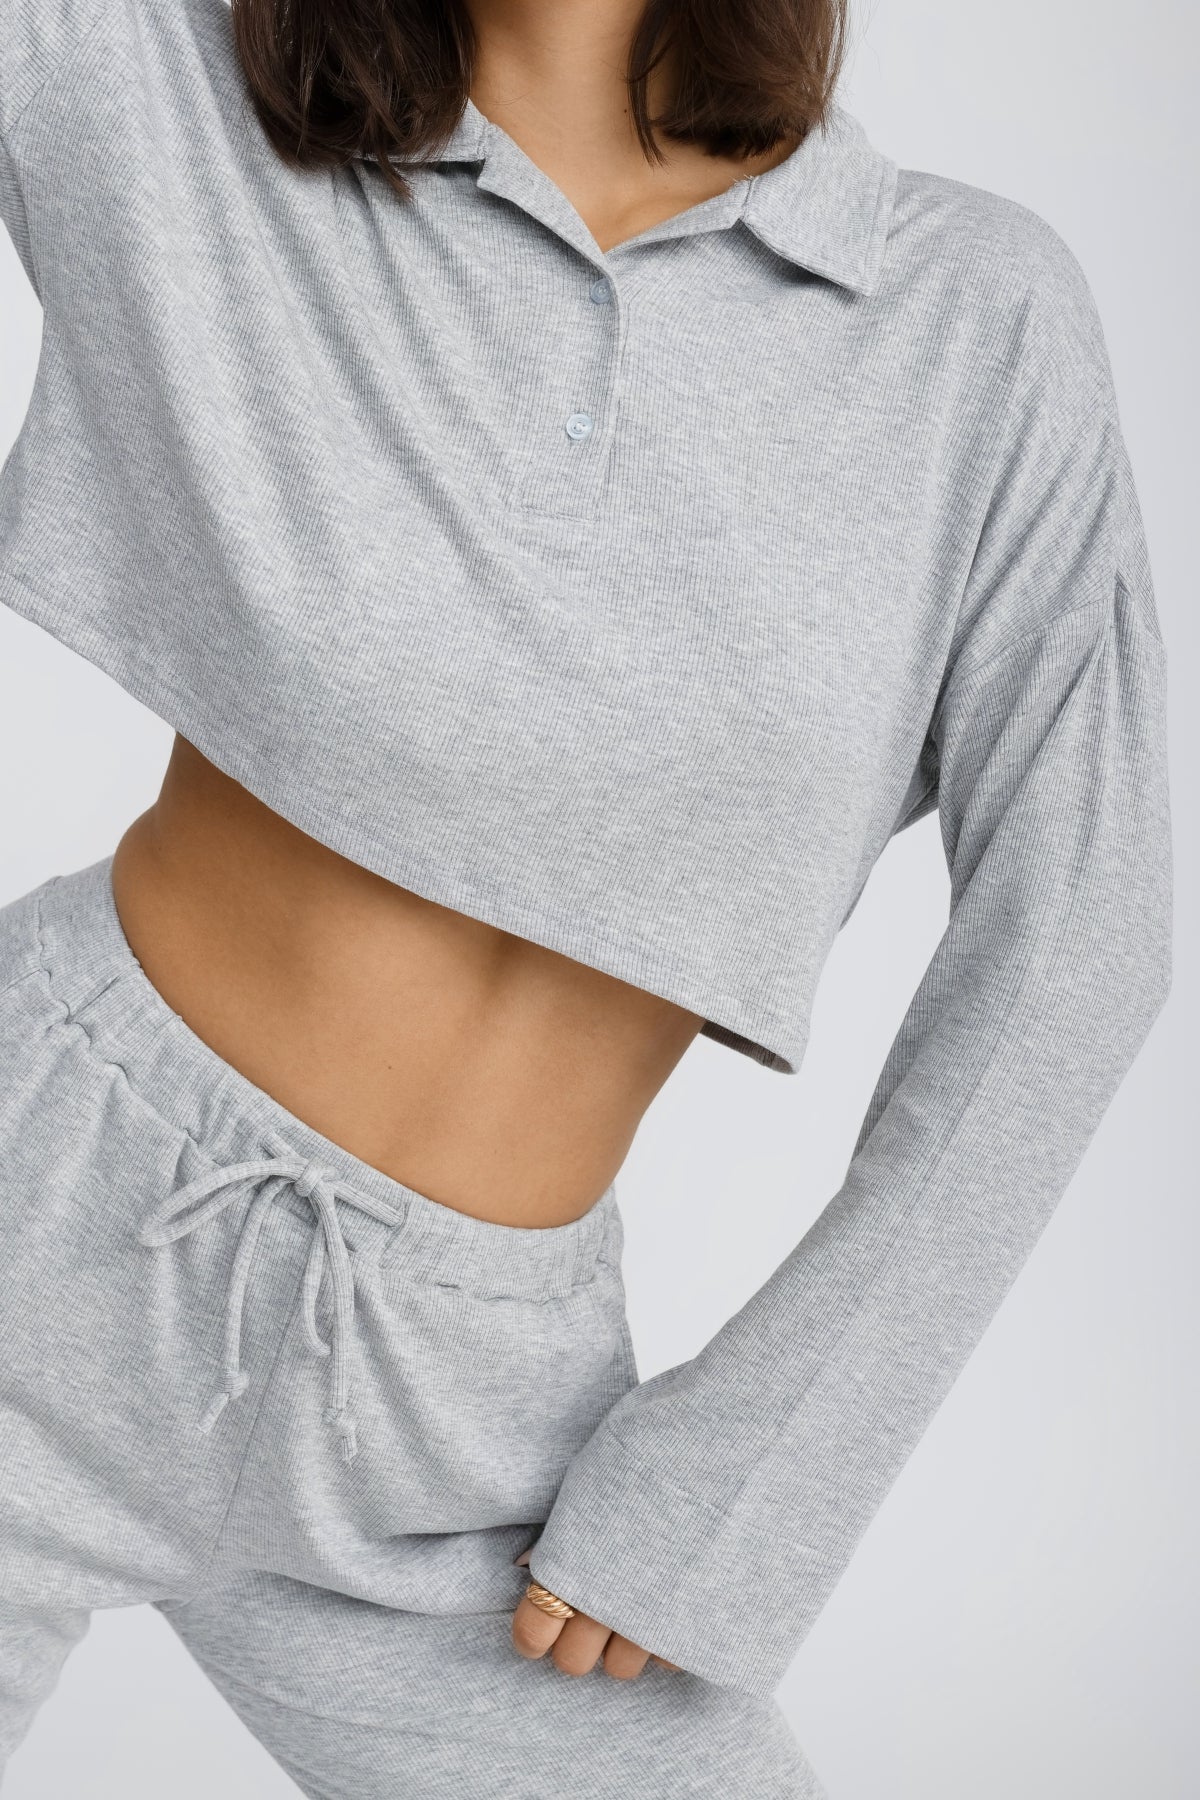 OVERSIZED LOUNGE CROP SHIRT IN MISTY GRAY